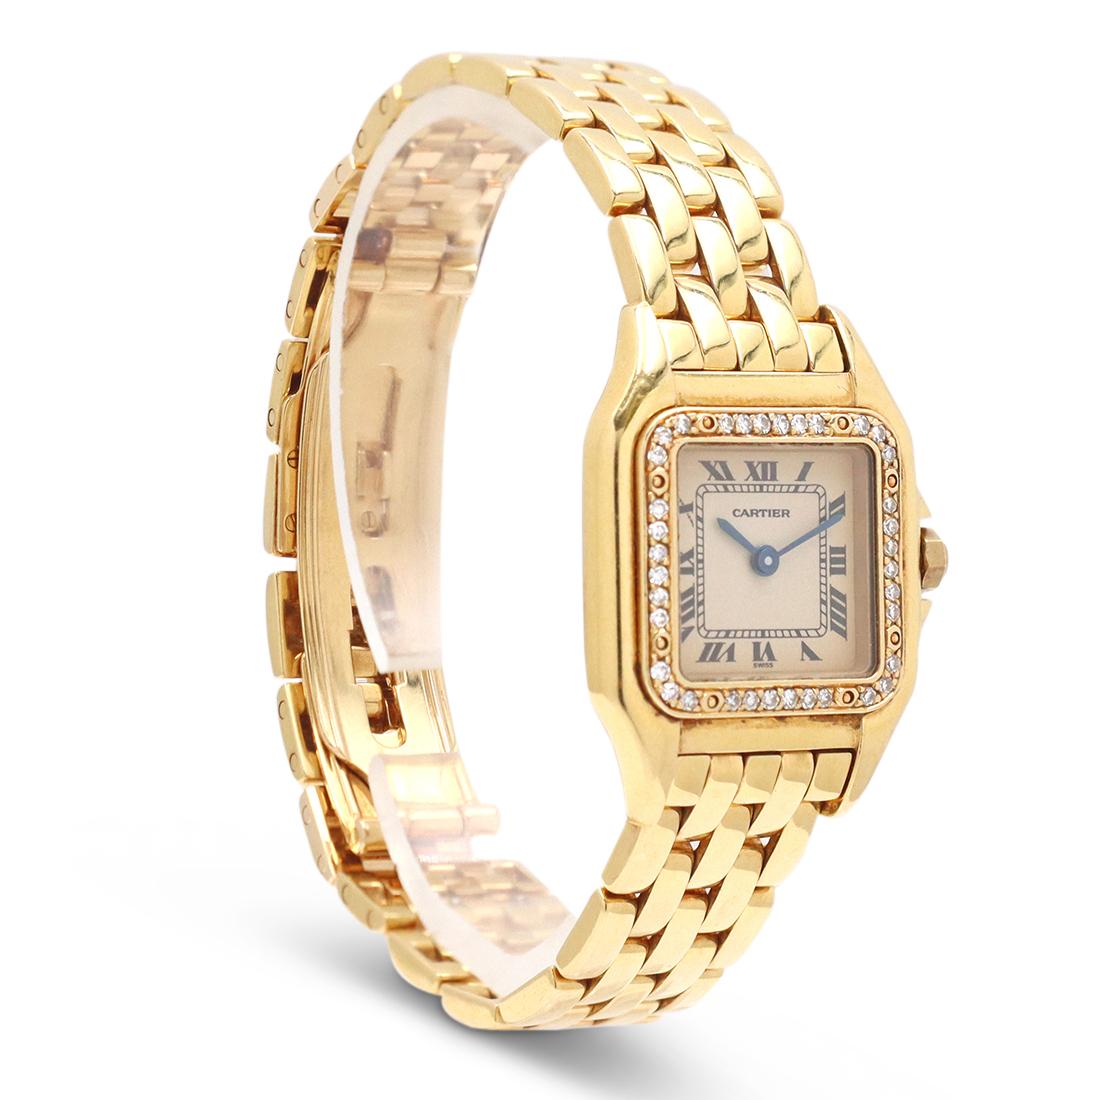 Authentic Cartier 'Panthère de Cartier' ladies watch crafted in 18 karat yellow gold. The case measures 30mm x 22mm with original diamond bezel and diamond-set crown, ivory dial, blue steel sword-shaped hands, and Roman Numeral hour markers. The 18